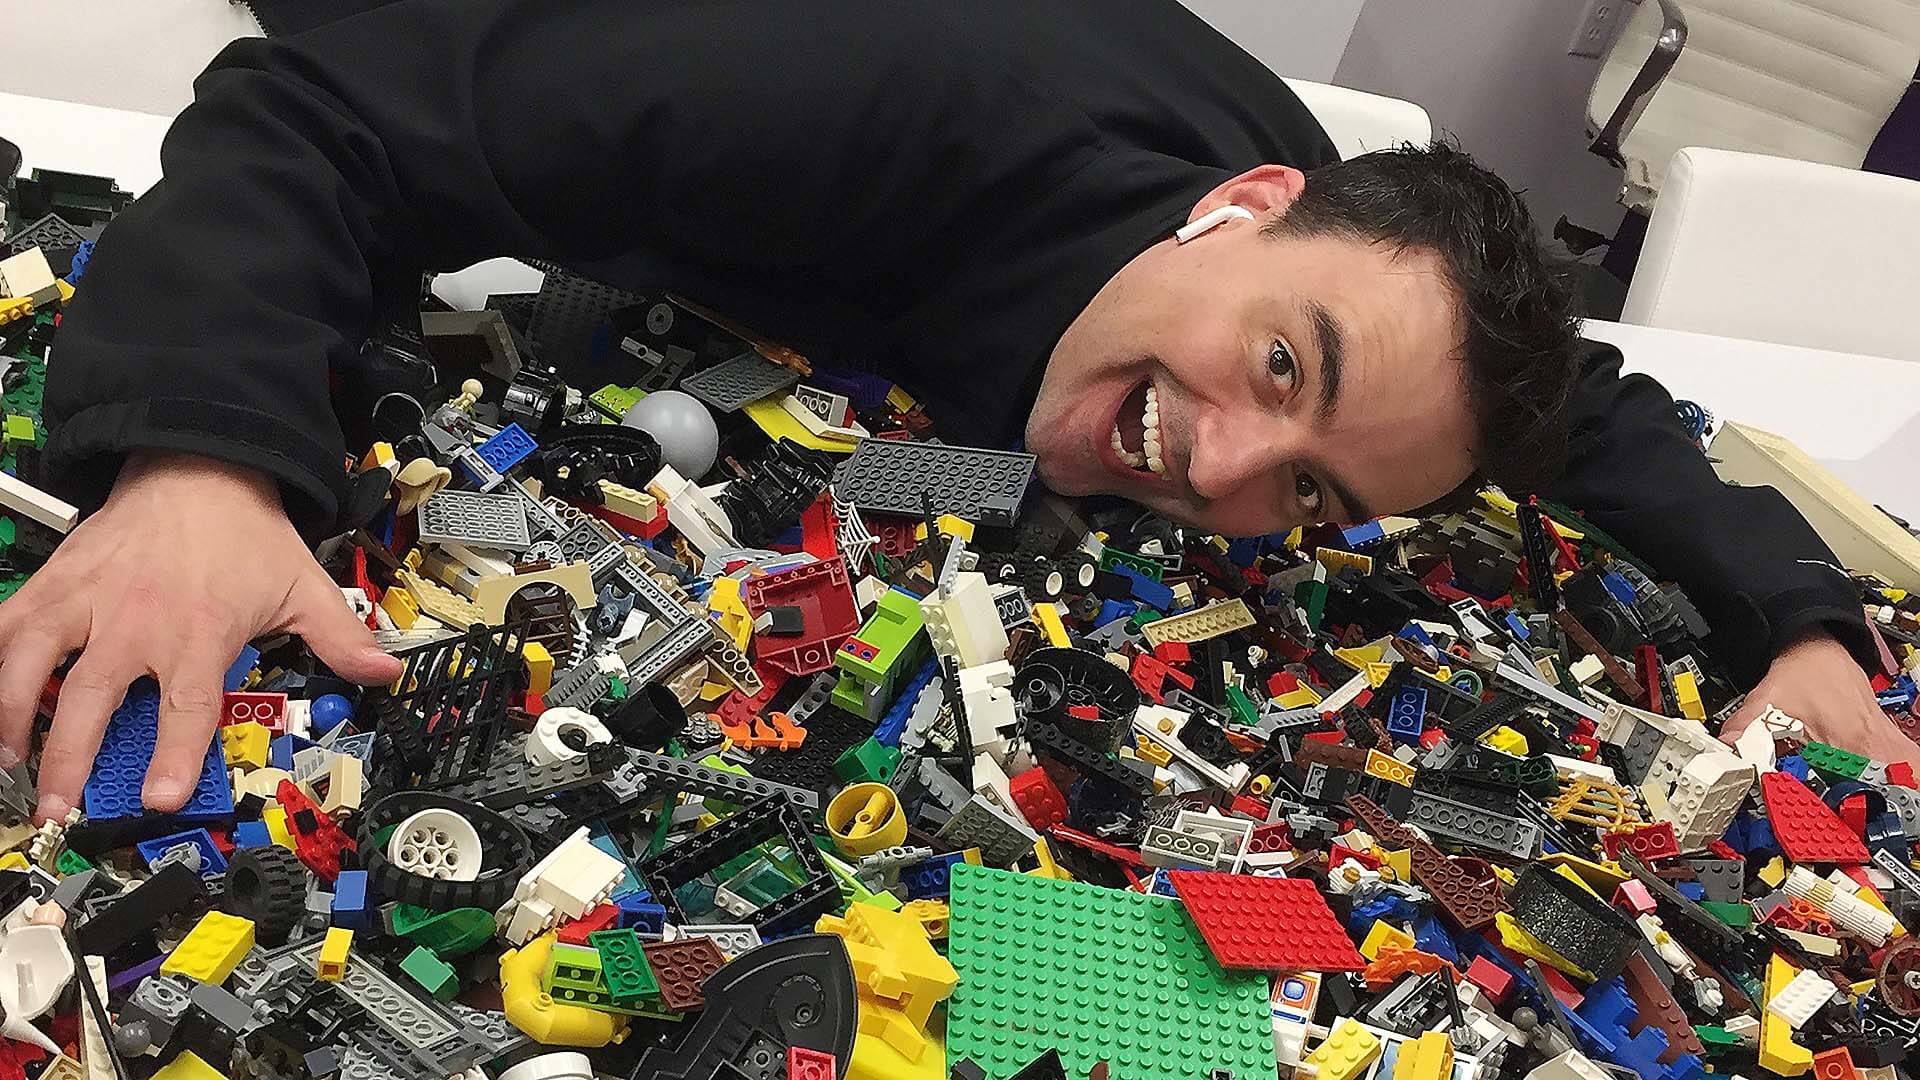 isral Duke leaning over a pile of Legos. He has a large smile and excited facial expression.